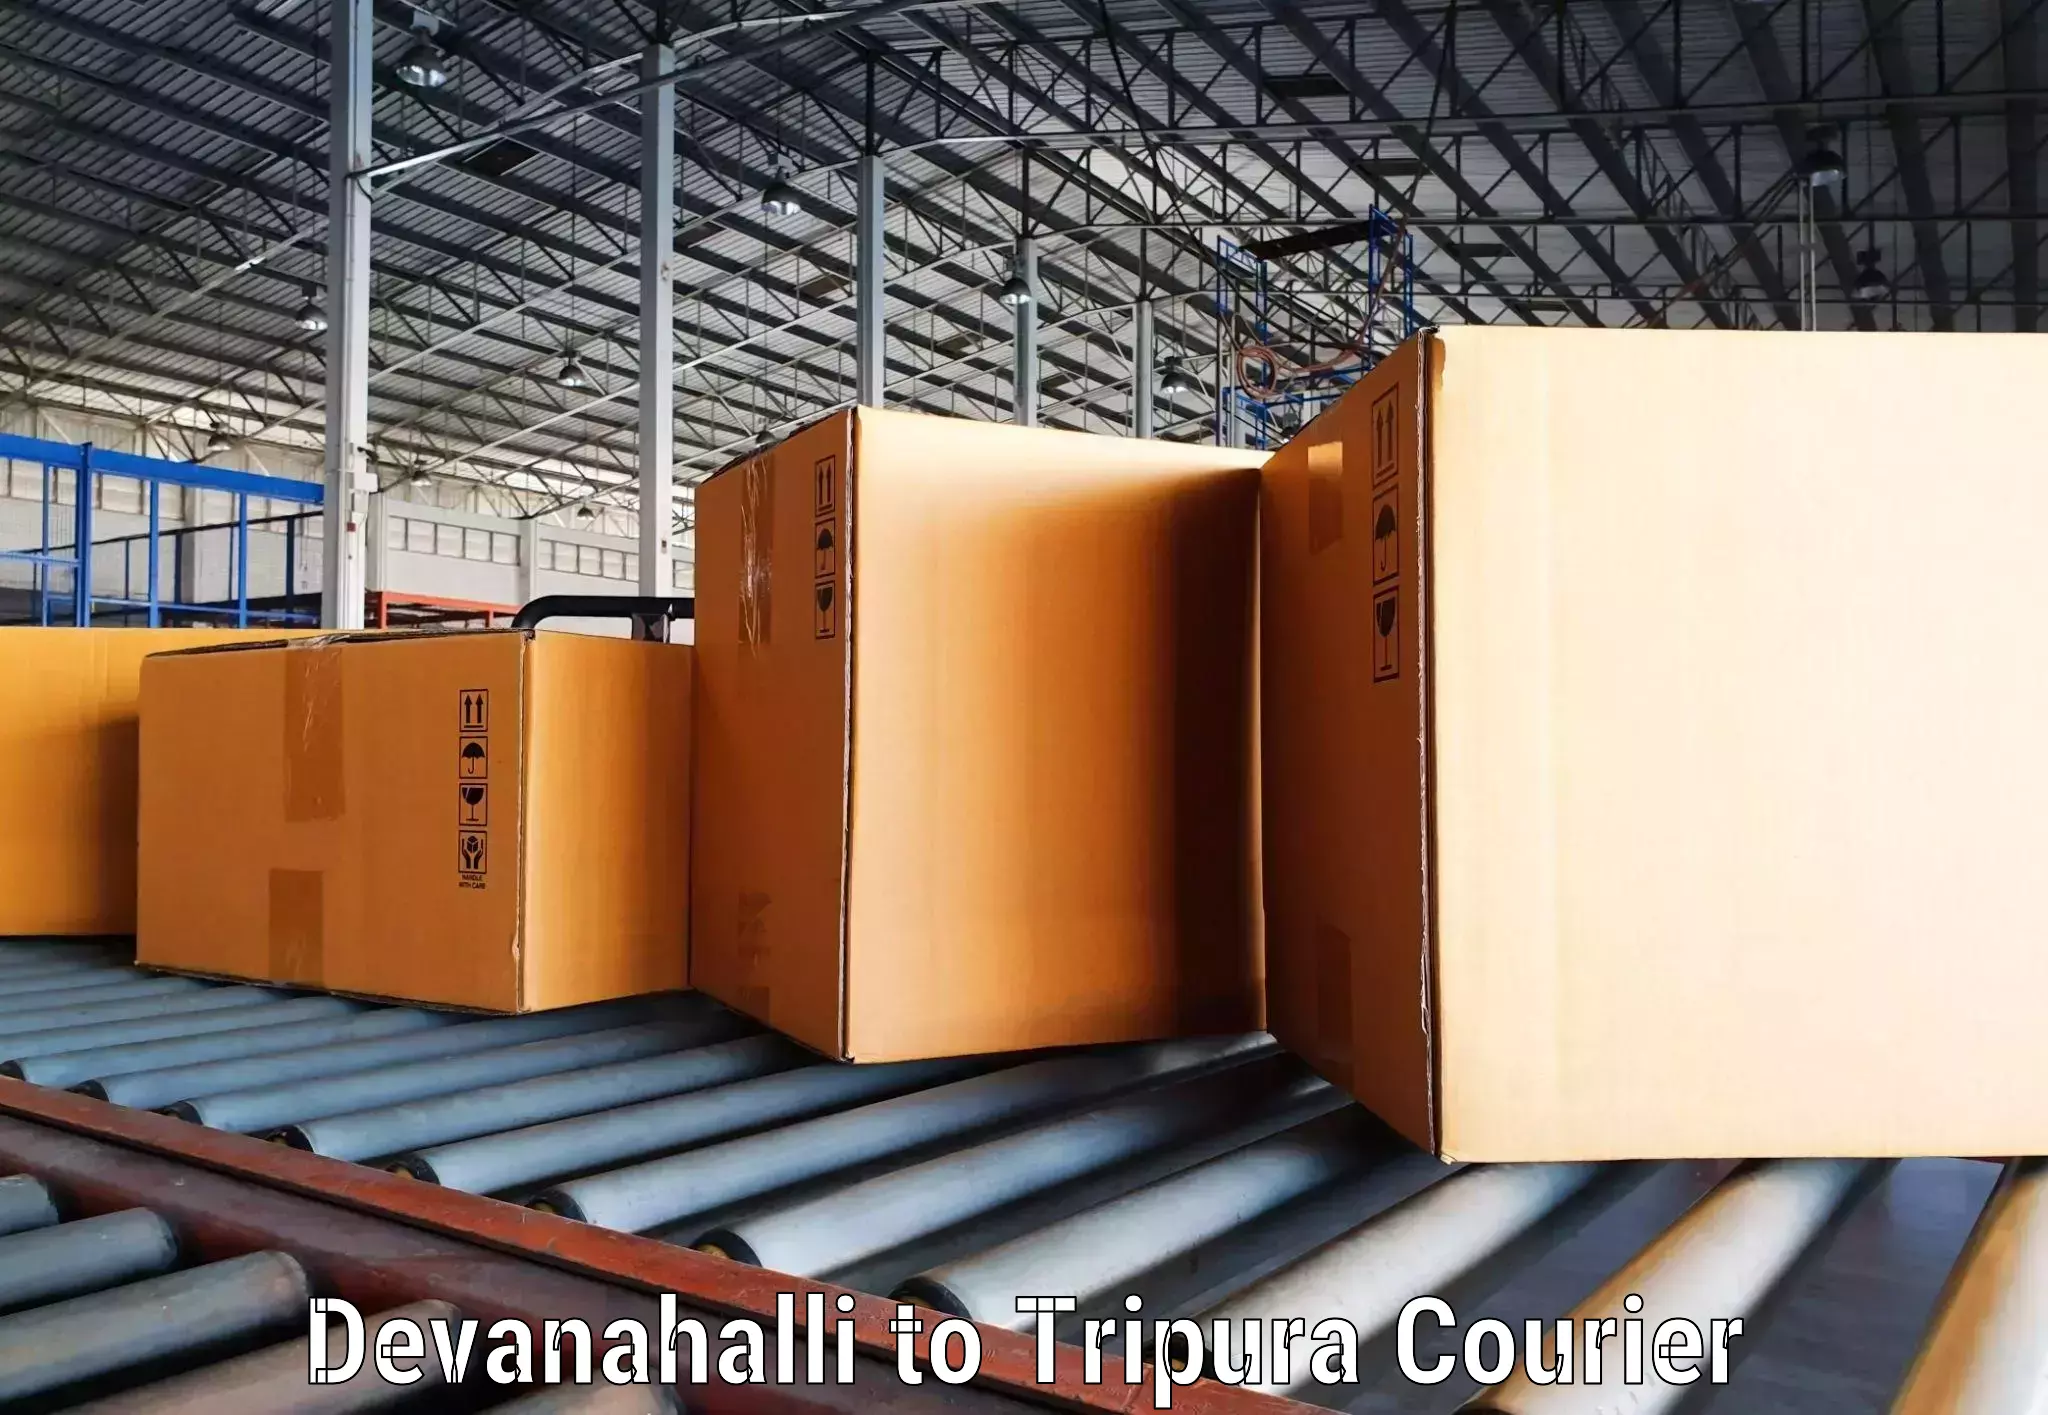 State-of-the-art courier technology Devanahalli to Tripura